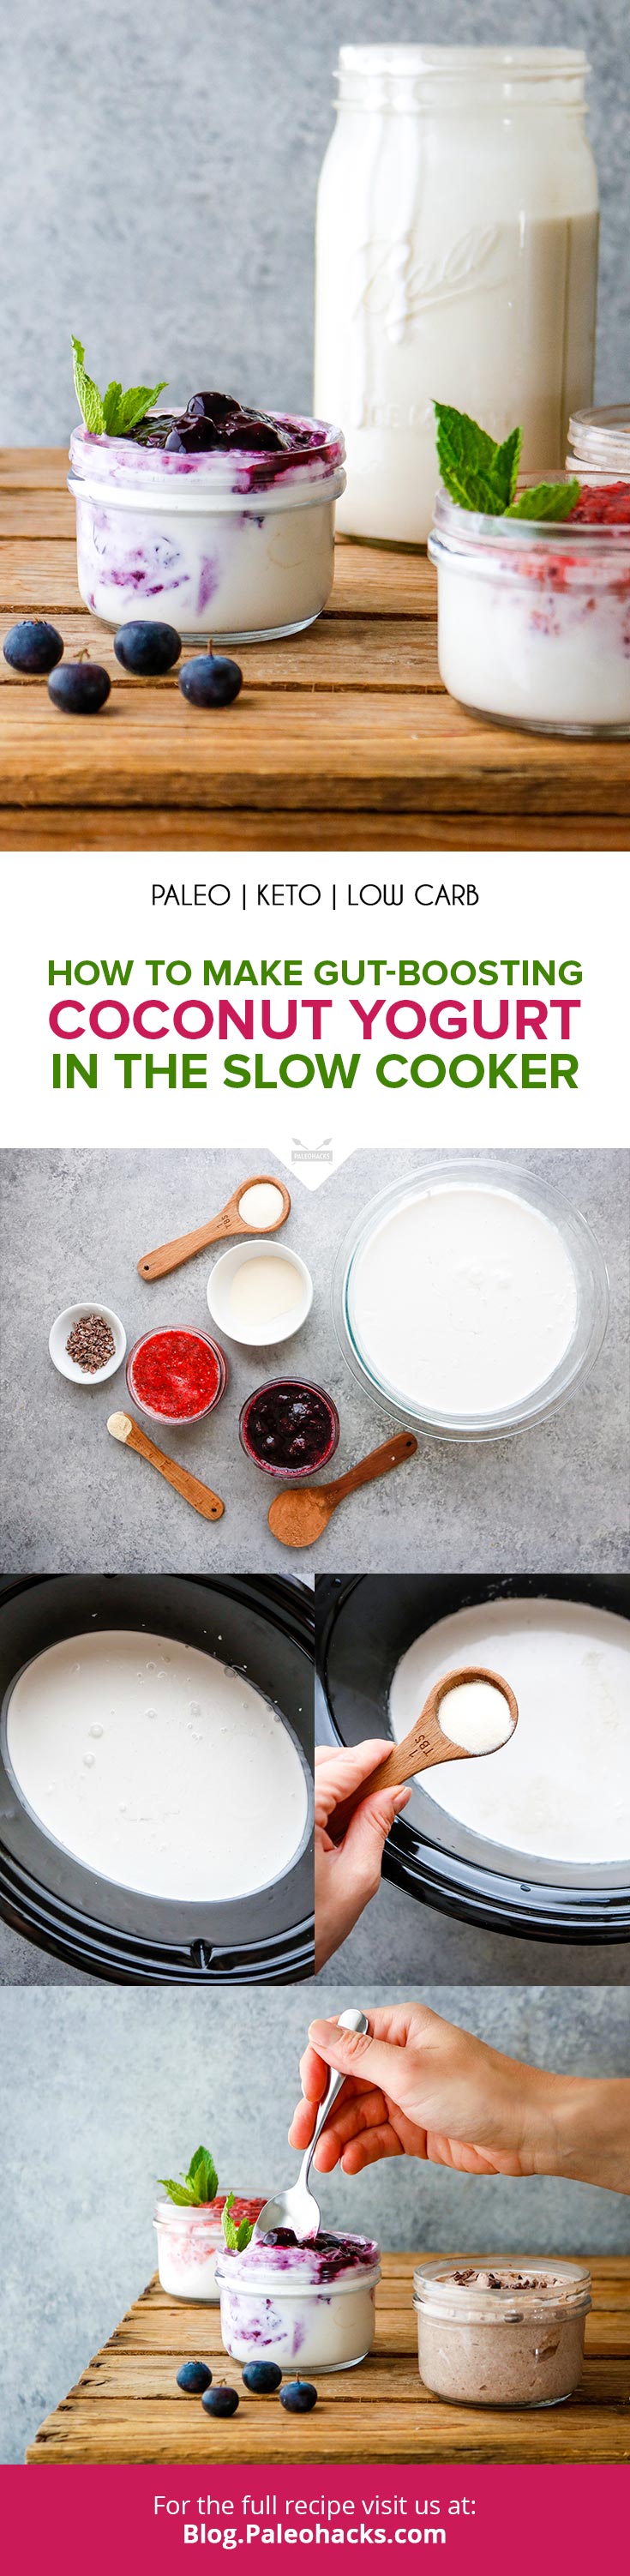 This gut-boosting, keto-friendly coconut yogurt requires only three ingredients and minimal prep. Making tangy and creamy yogurt at home is much easier than you may think.